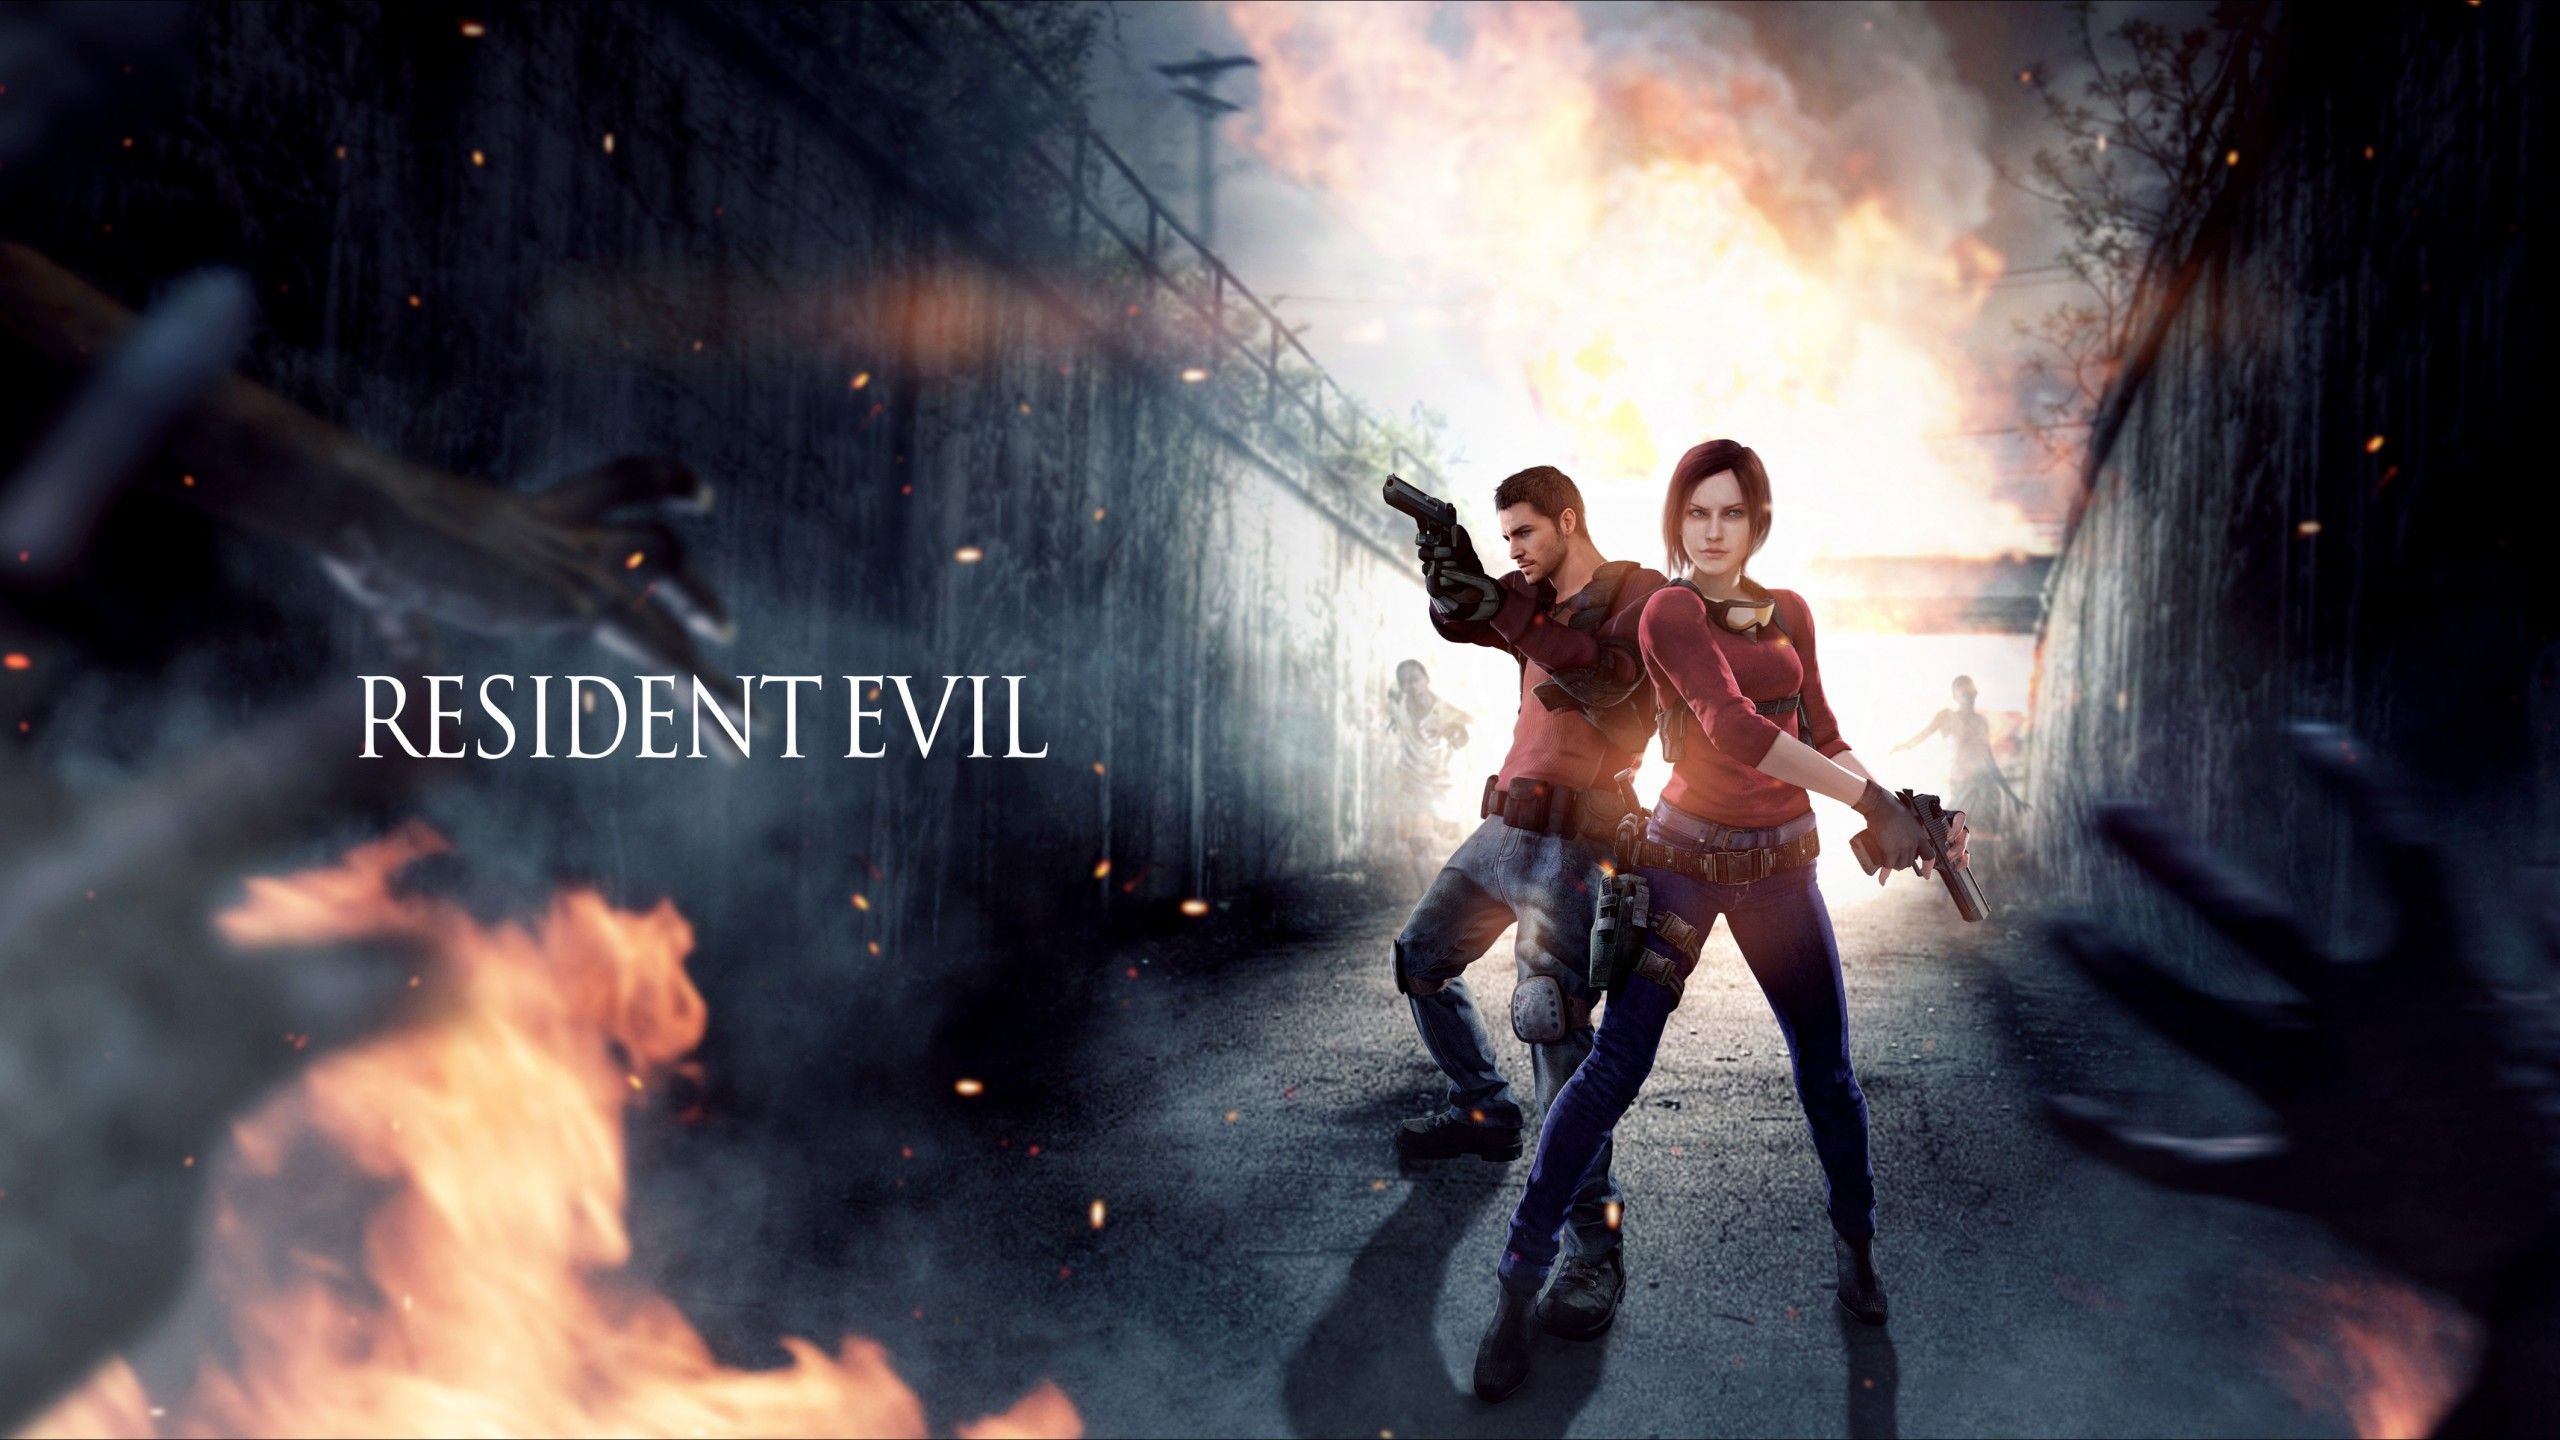 resident evil, claire redfield, chris redfield Wallpaper, HD Games